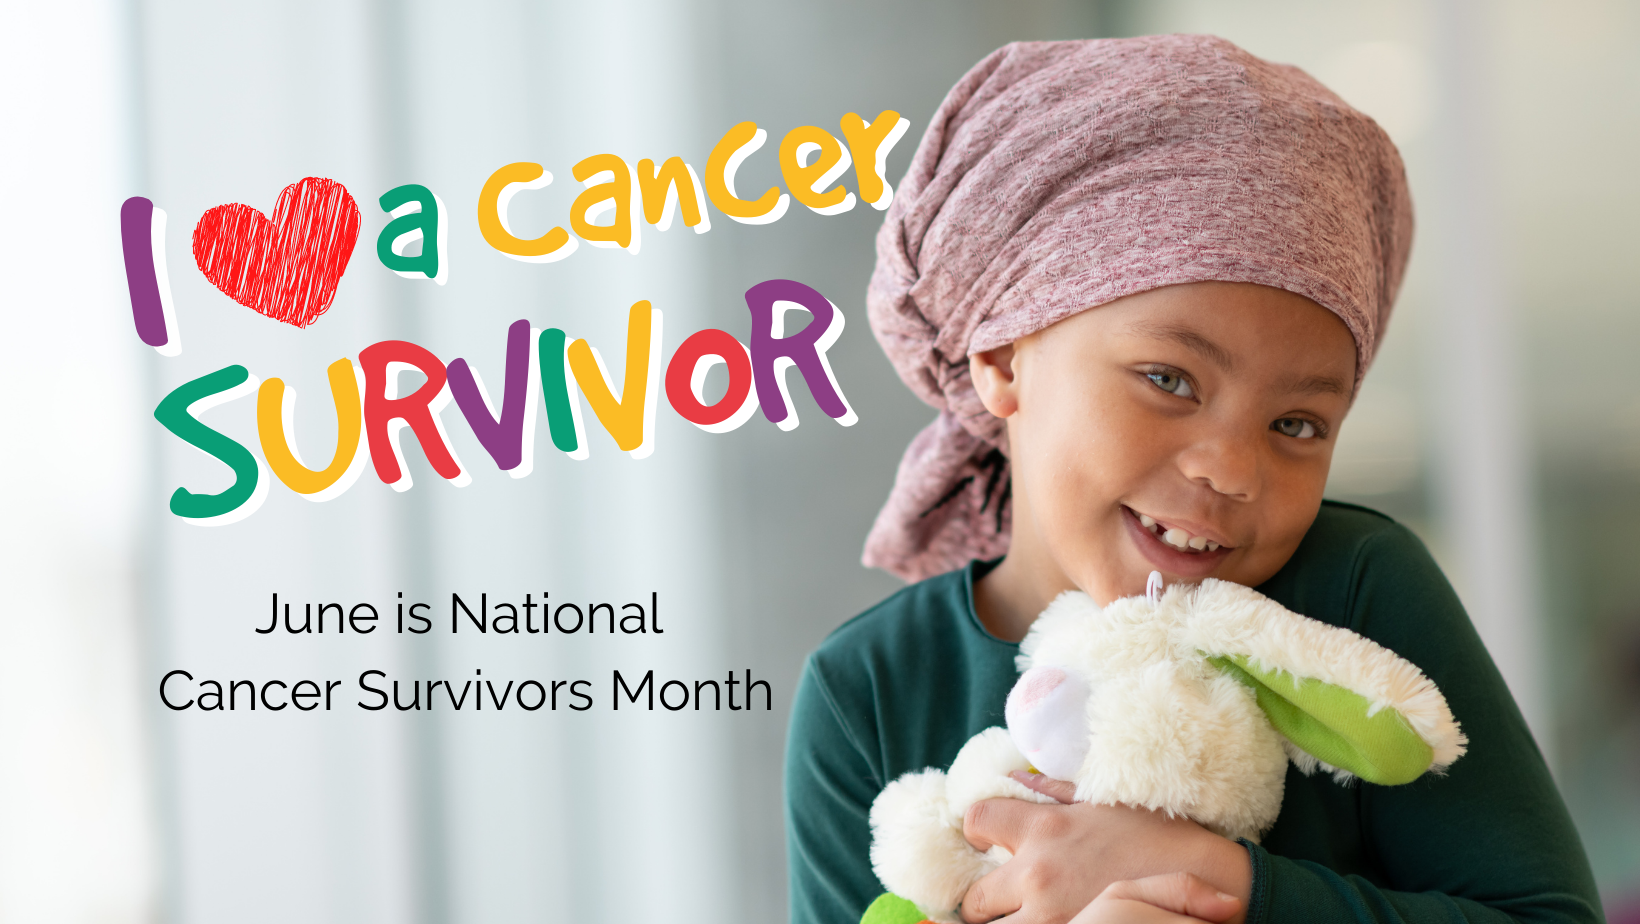 5 Ways To Celebrate National Cancer Survivors Month - Care Camps